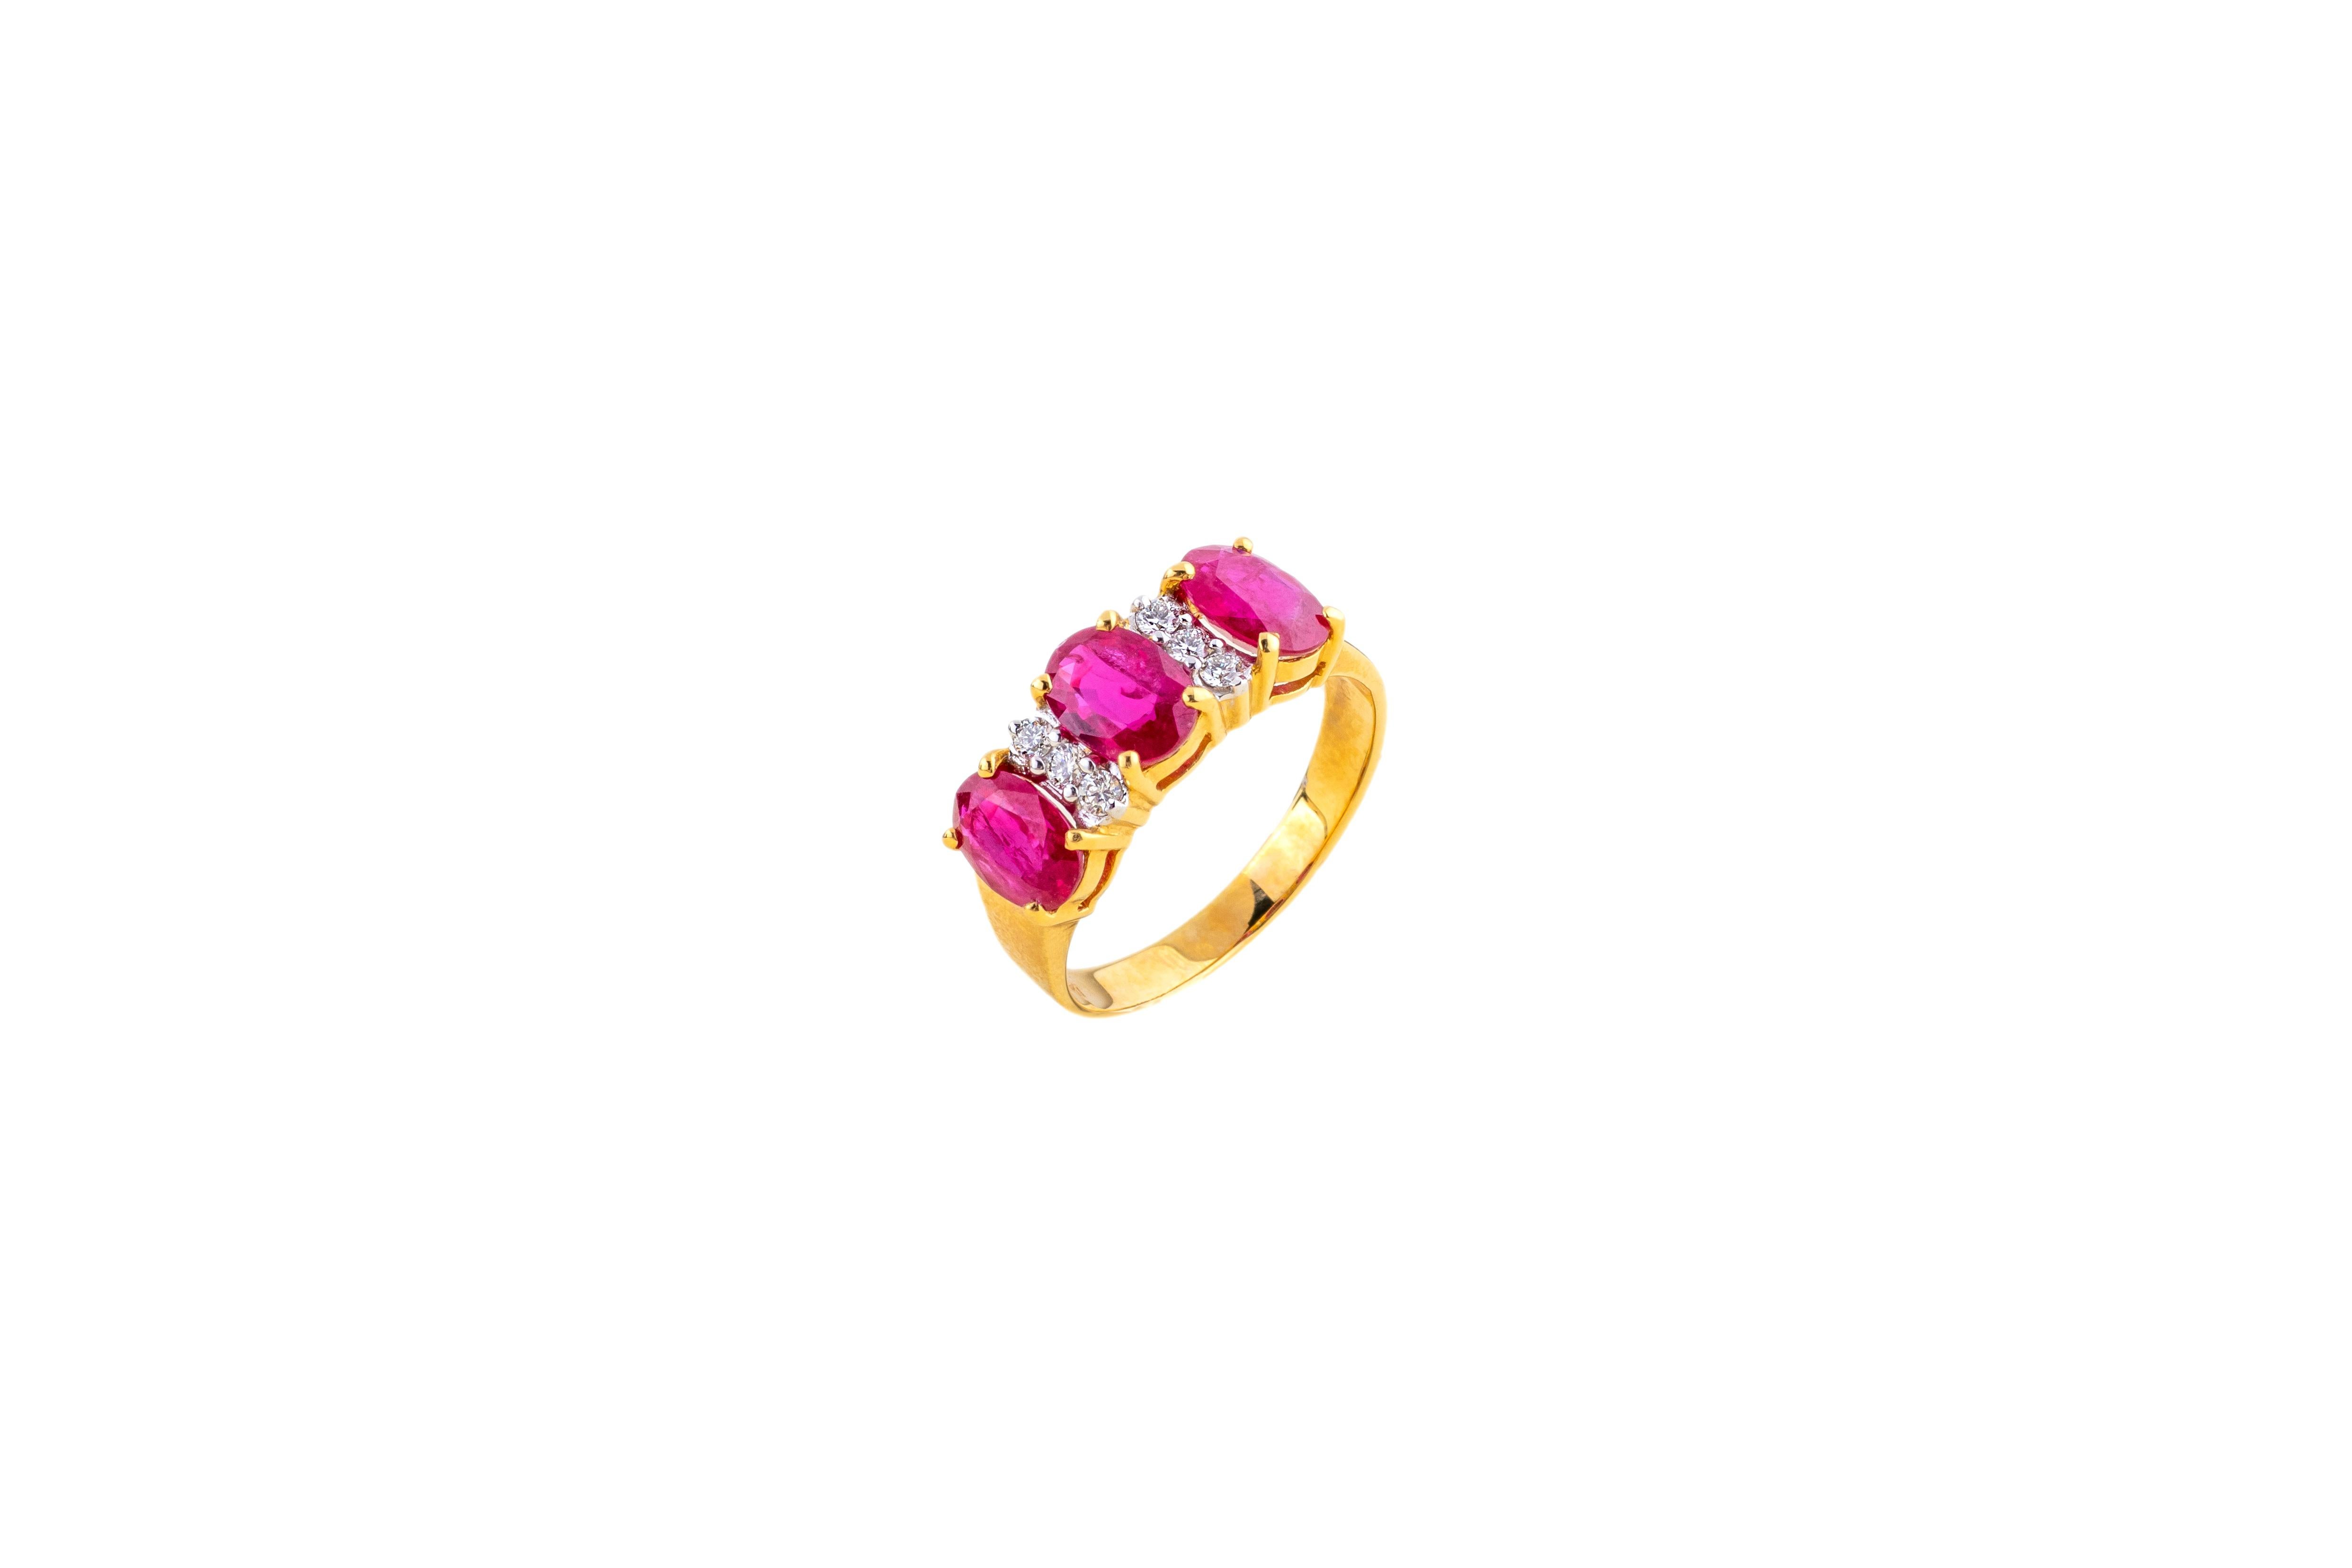 18 k yellow gold
punched with fine content 18k
3 rubies together 2.82 ct
6 diamonds together 0,13 ct
Ring size: 7/54,5
Weight: 5 grams